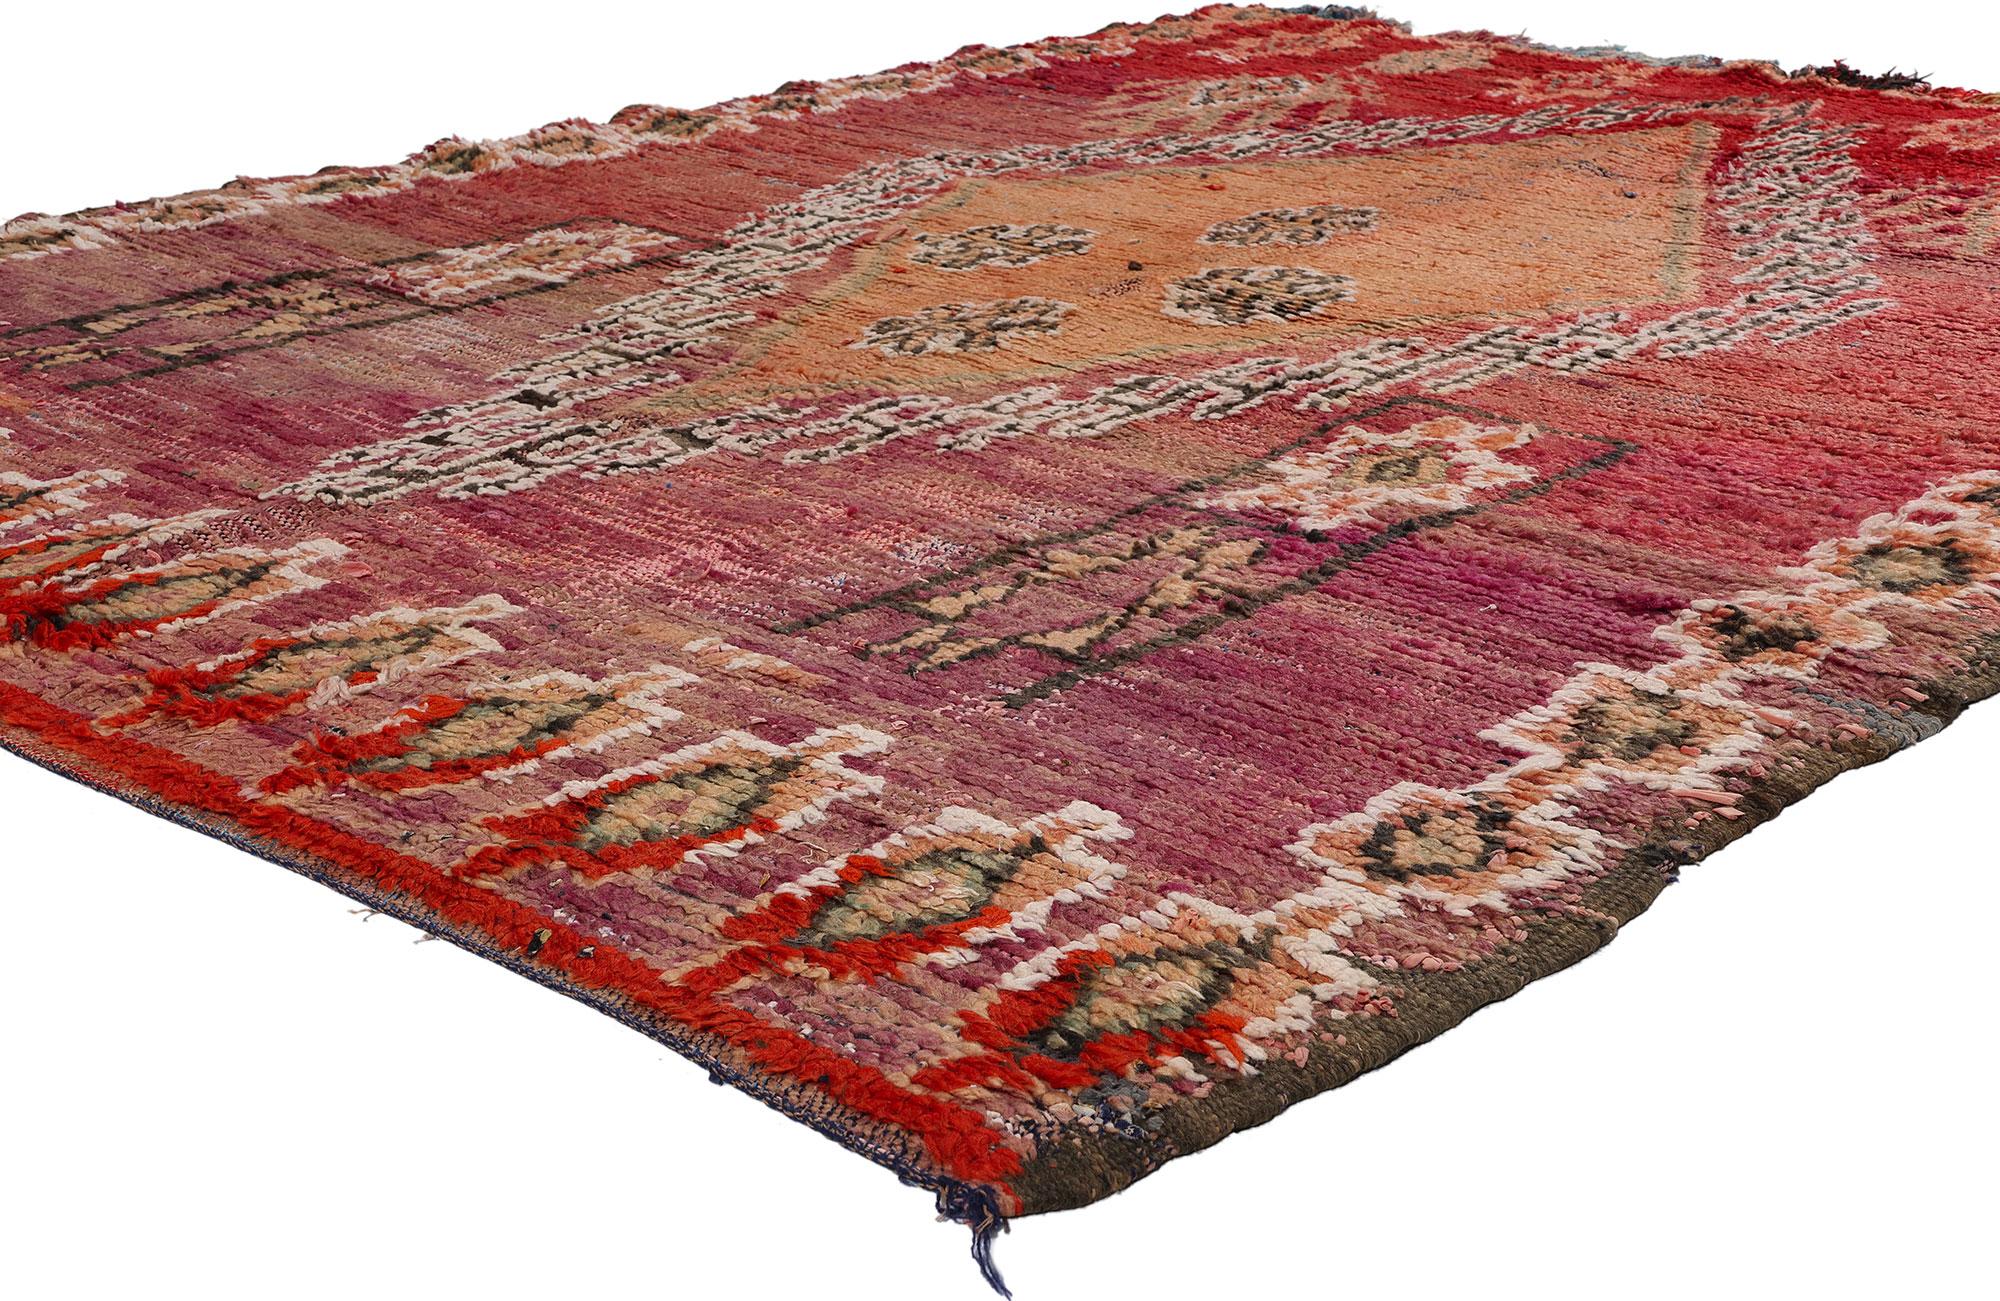 21776 Vintage Red Boujad Boucherouite Moroccan Rag Rug, 06'02 x 07'09. The Boujad rag rug, or Boujad Boucherouite rug, is a testament to the tribal essence of sustainable craftsmanship, originating from the Boujad region in the Khouribga province of